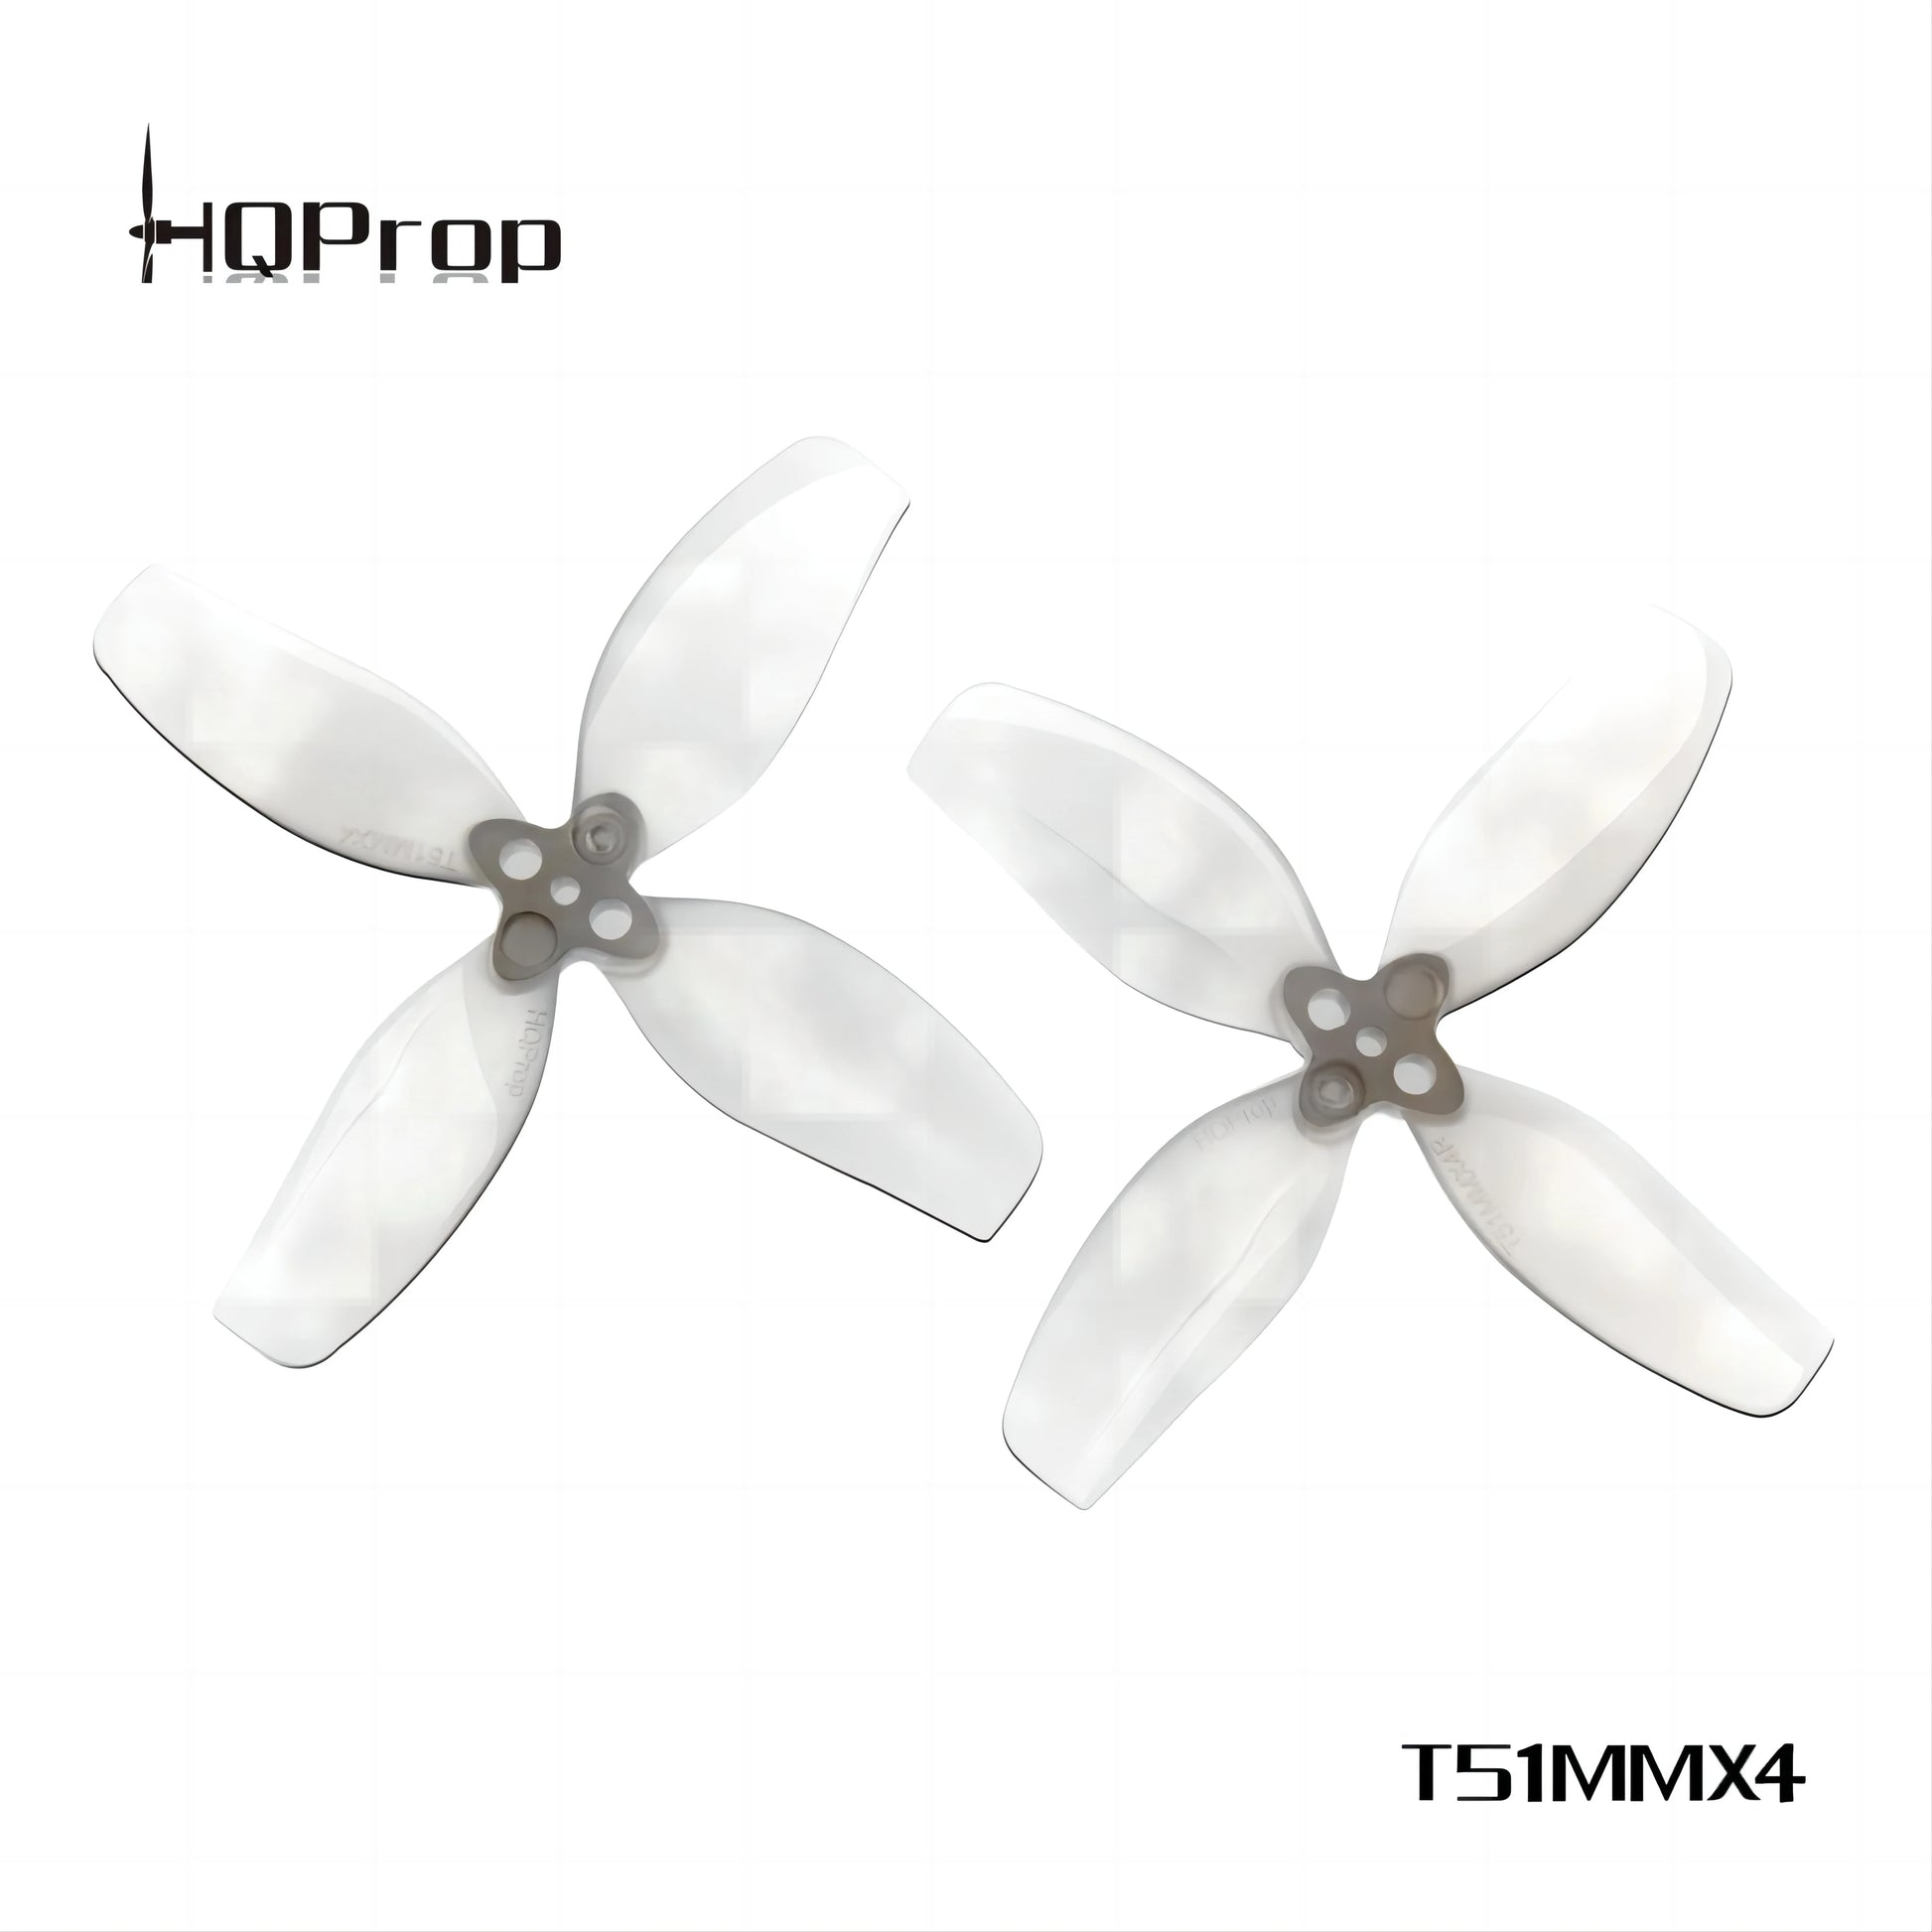 16pcs/8pairs HQProp DT51MMX4GR 4-Blade propeller 2inch prop for FPV drone parts